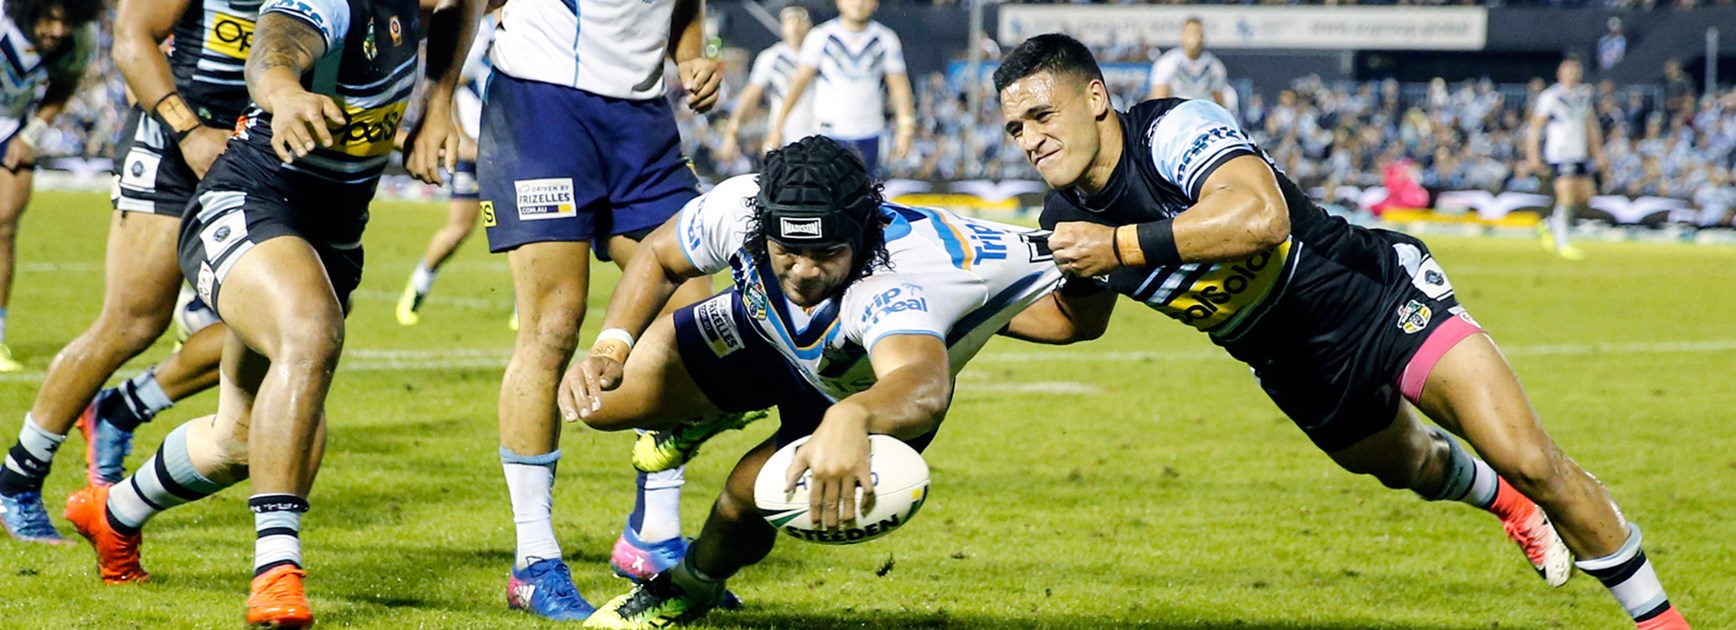 Leivaha Pulu scored two crucial tries in the Titans' win over the Sharks in Round 8.